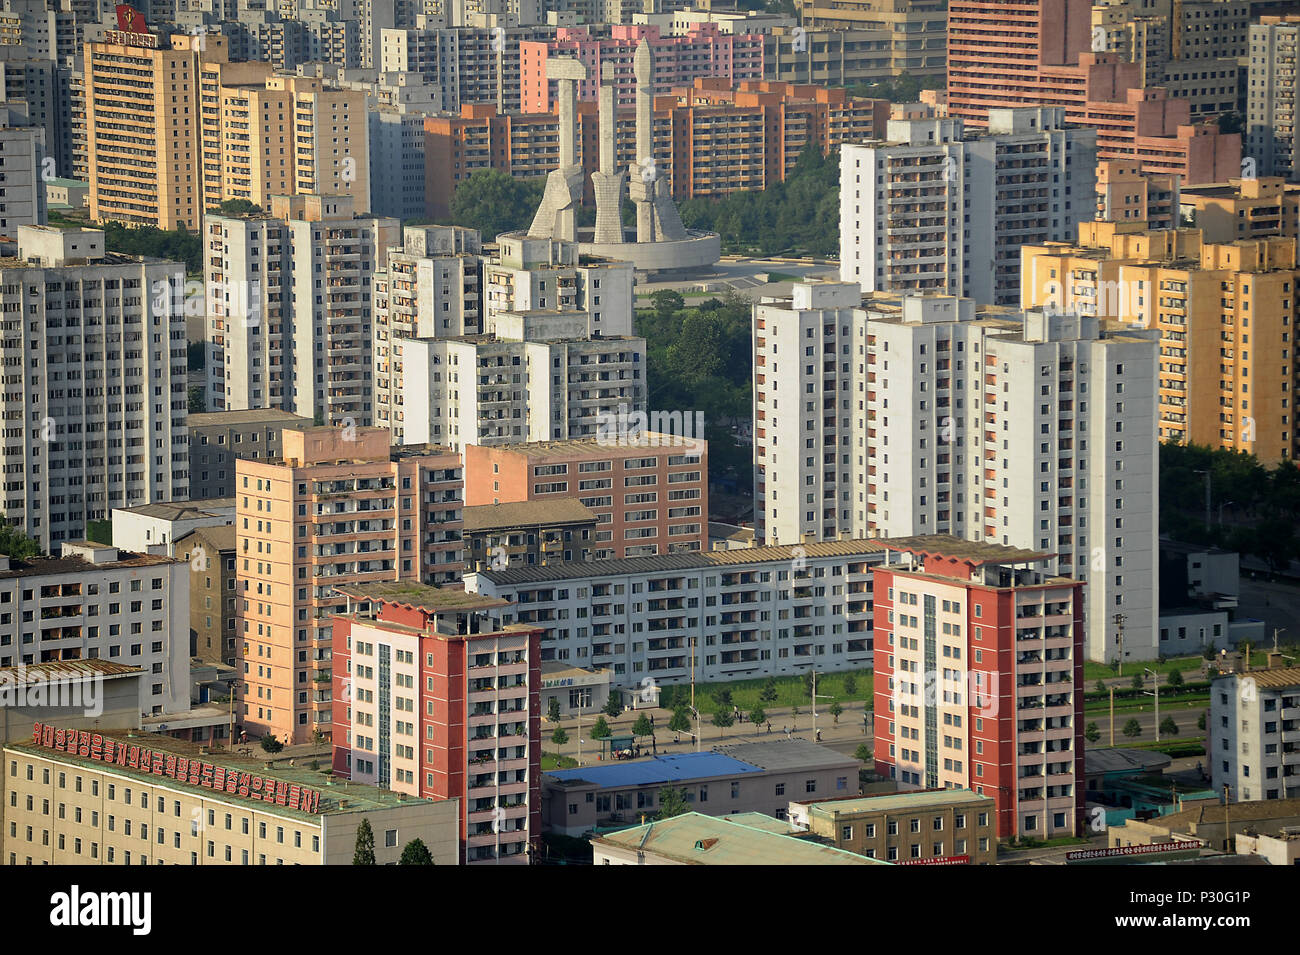 Pyongyang, North Korea, residential and office building in the center Stock Photo